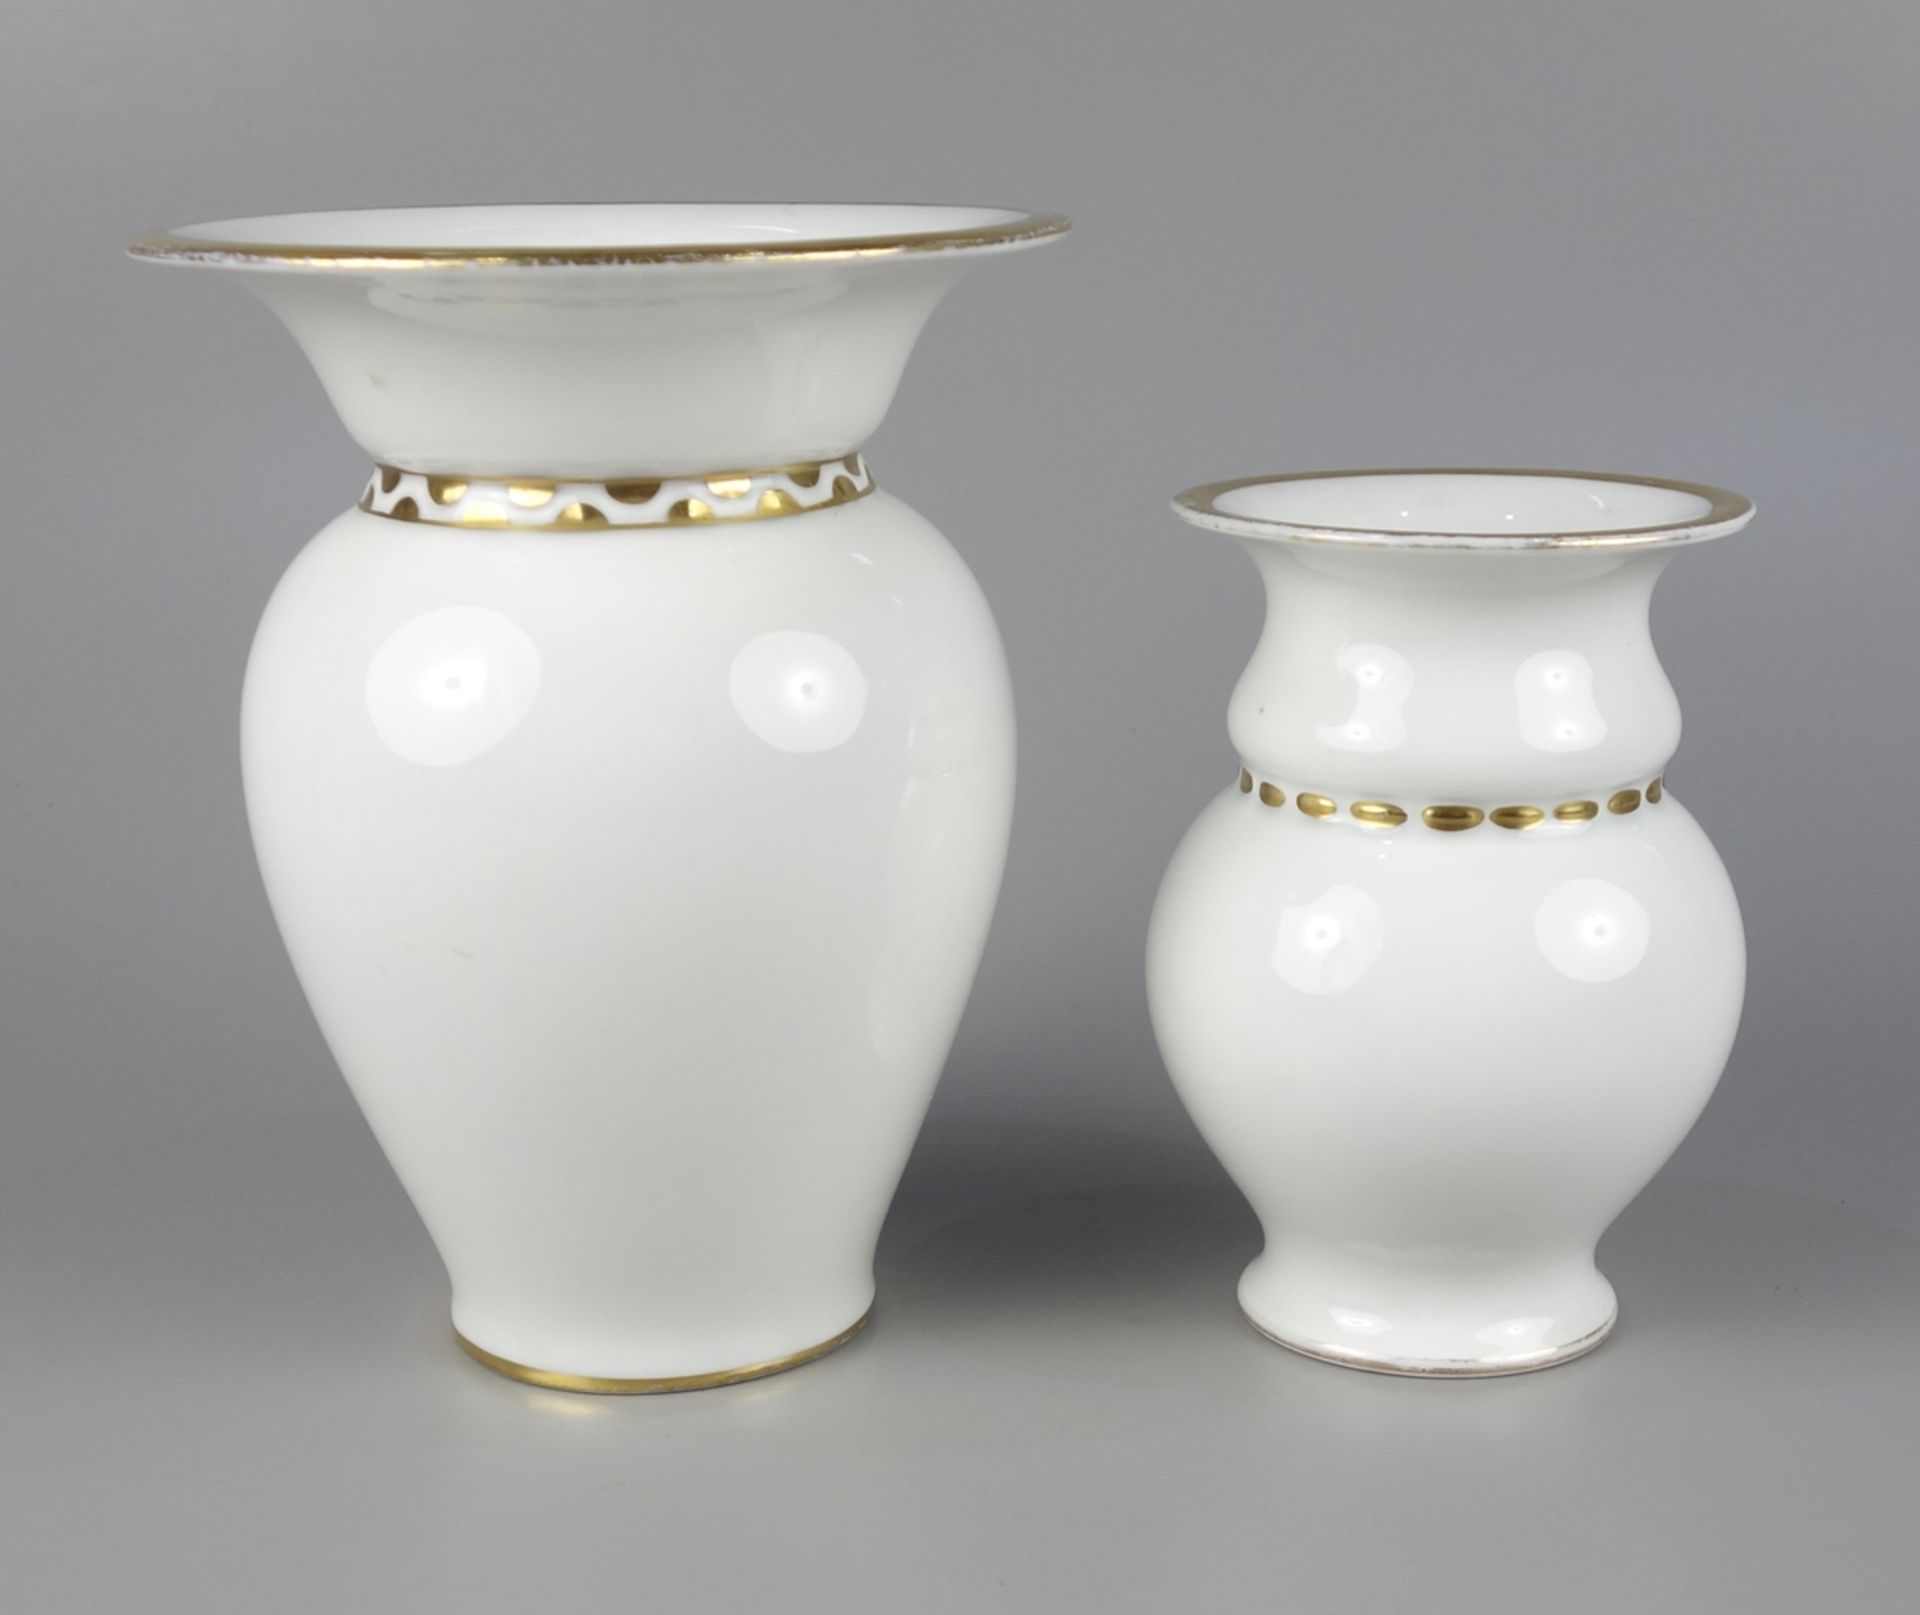 2 vases, Prof. Fritz Klee for Lorenz Hutschenreuther AG, Selb, Department of Art, 1920s